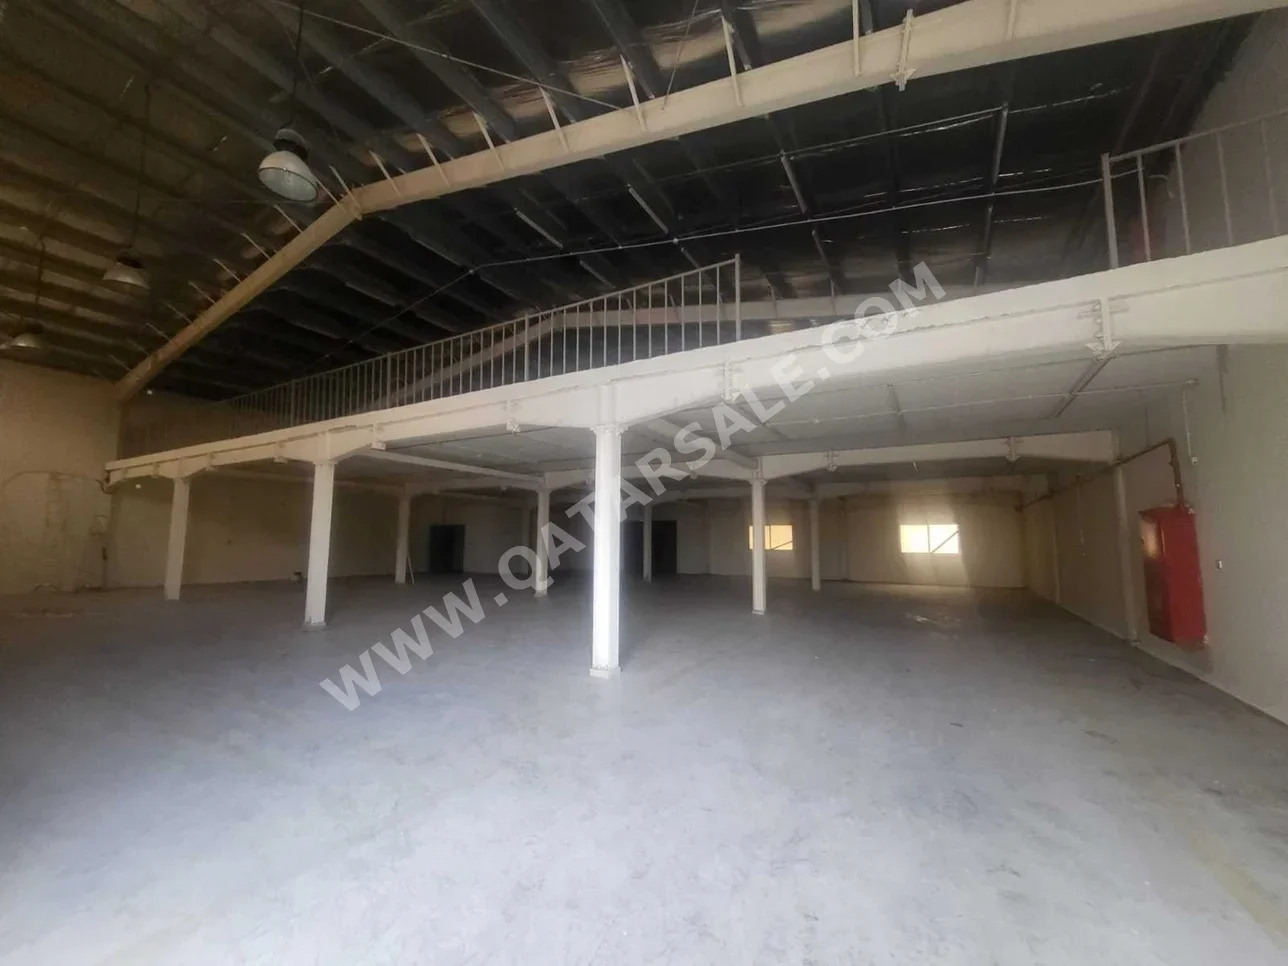 Warehouses & Stores Doha  Industrial Area Area Size: 1100 Square Meter